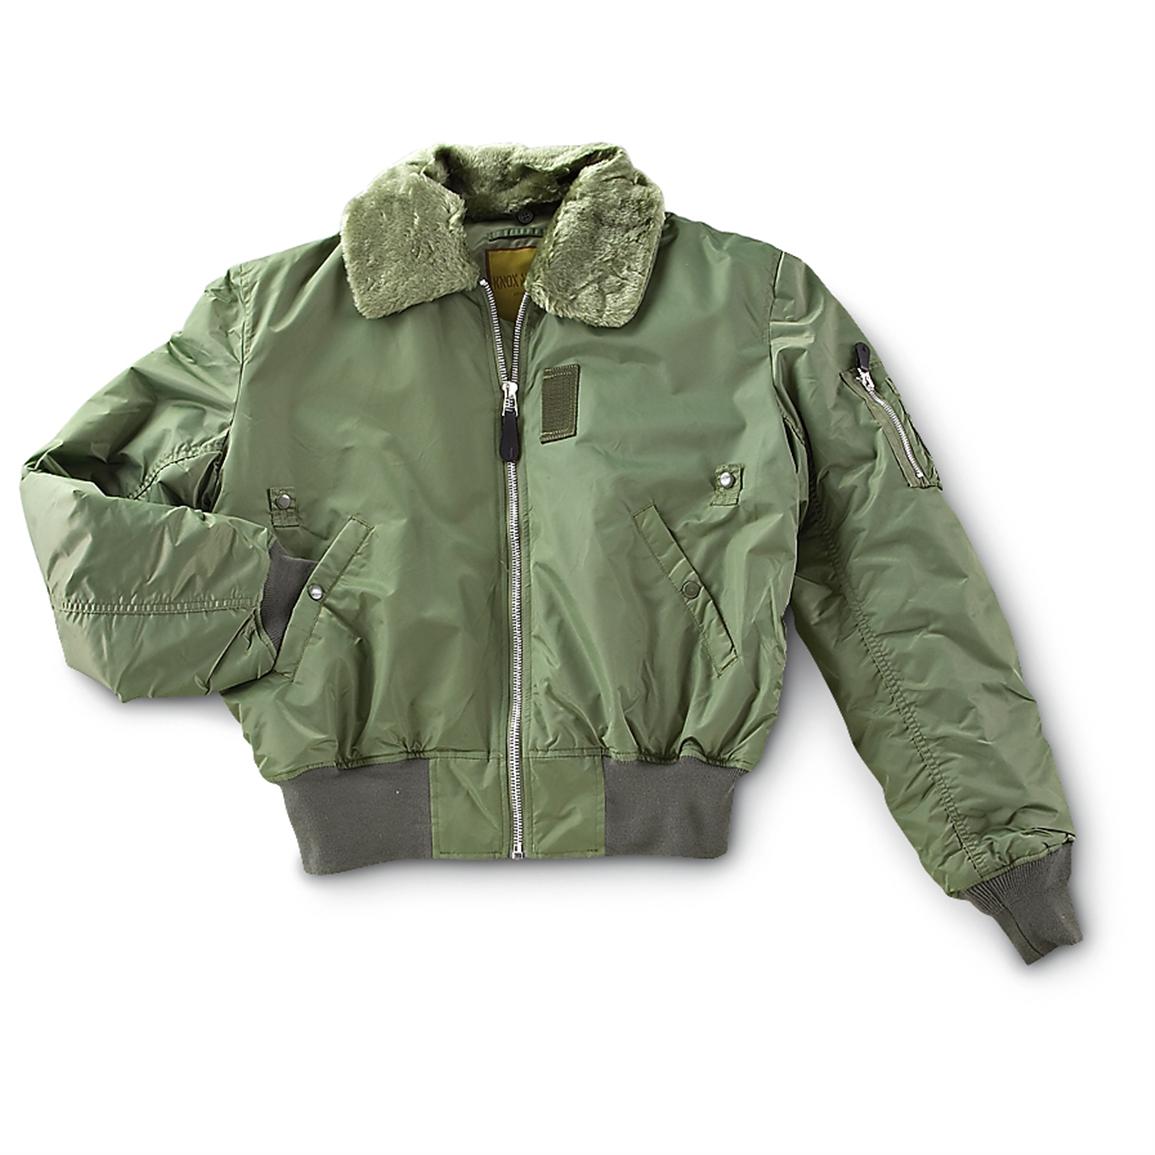 Military-spec B15 Bomber Jacket - 190936, Tactical Clothing at ...